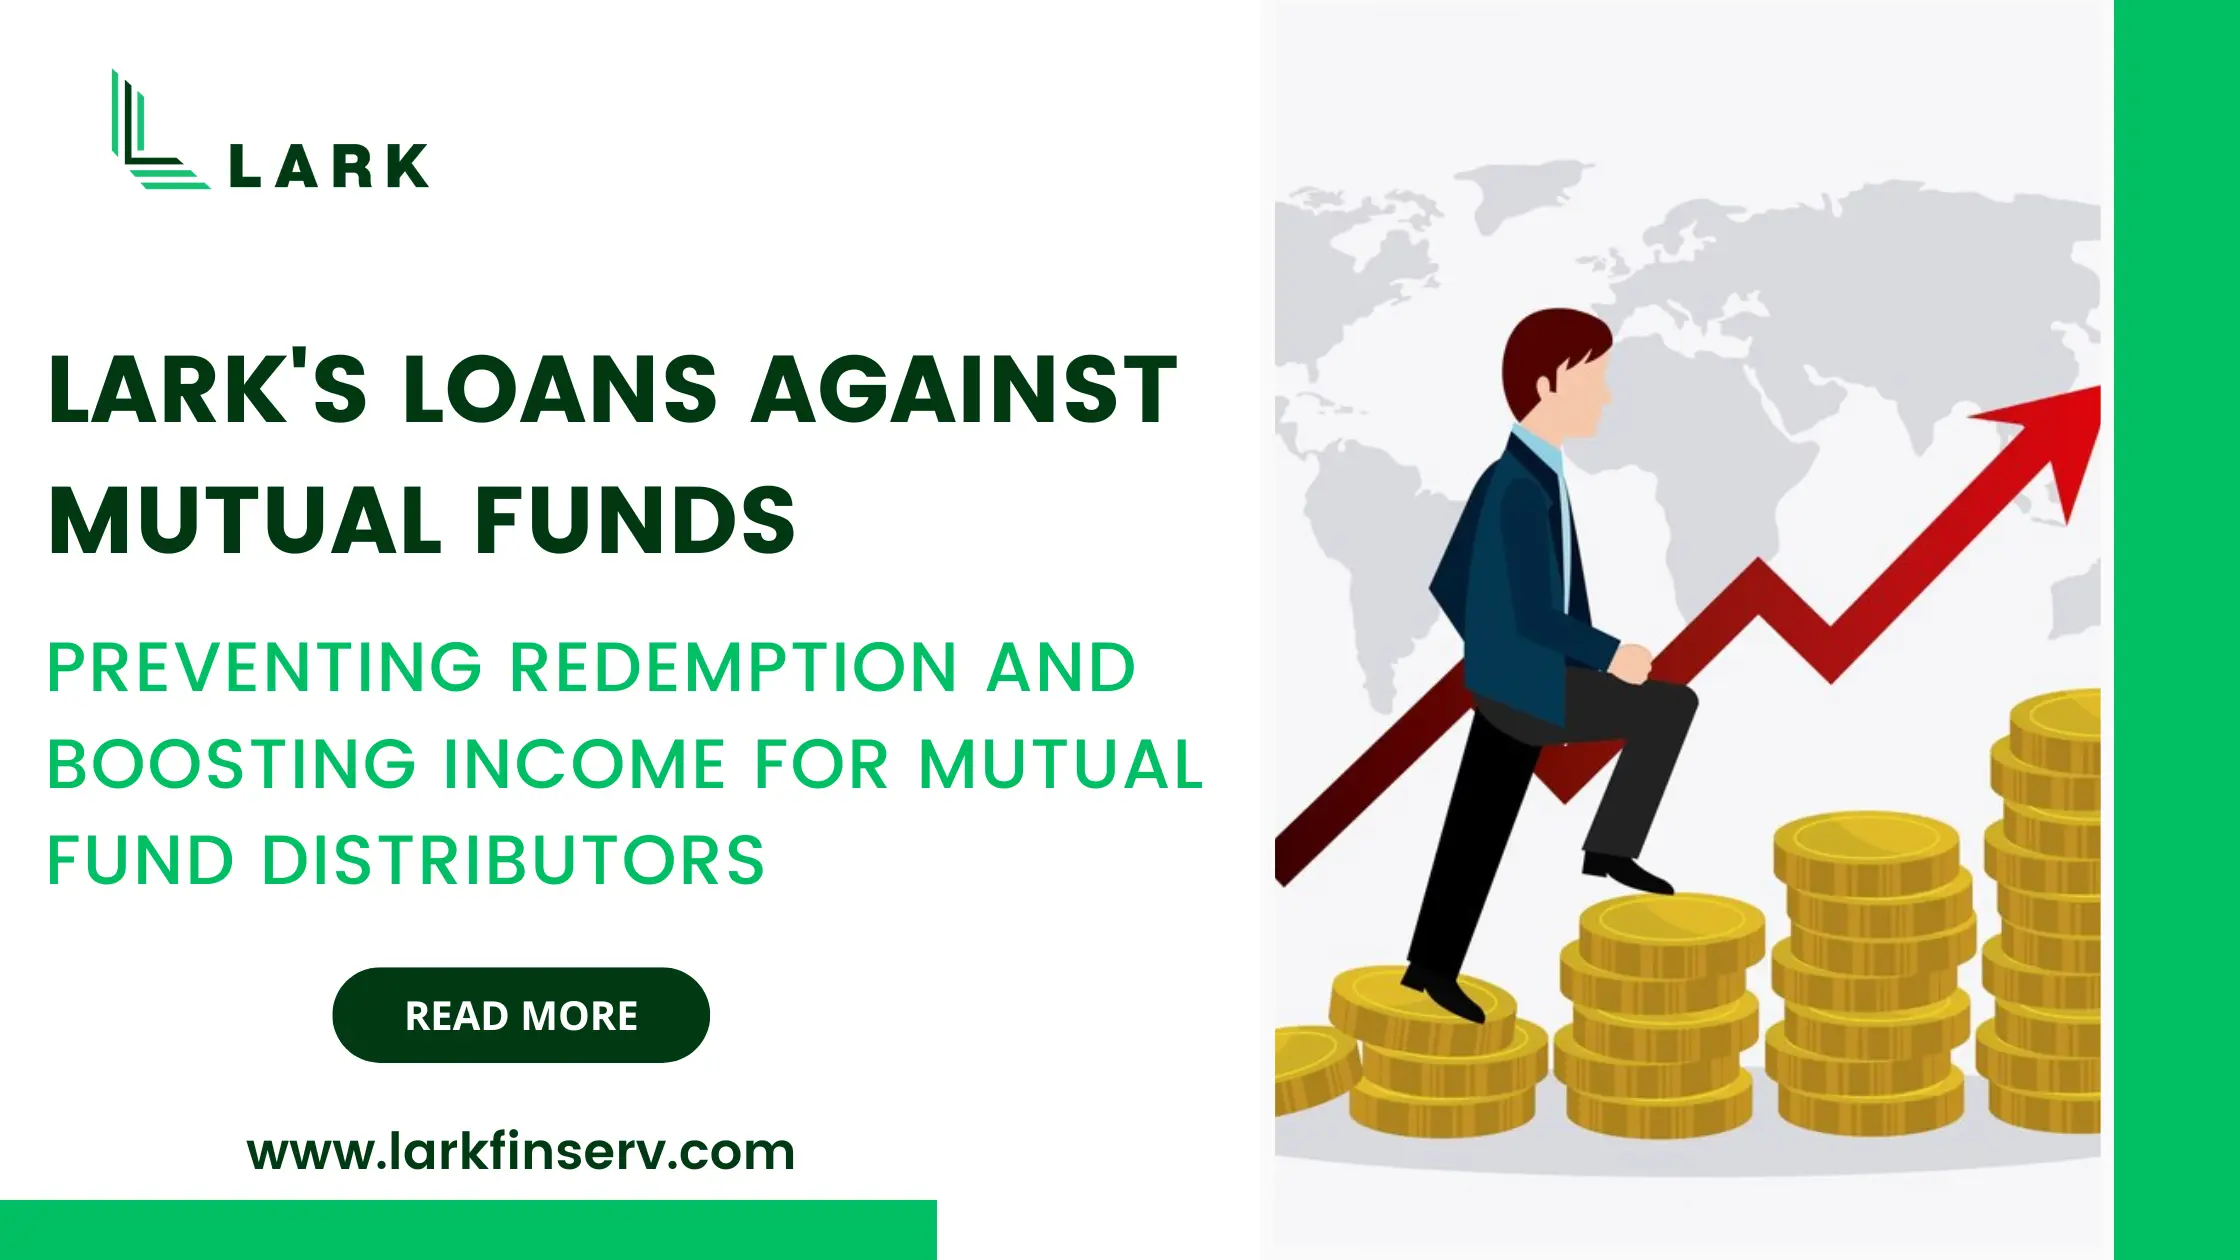 LARK’s Loans Against Mutual Funds: Preventing Redemption and Boosting Income for Mutual Fund Distributors